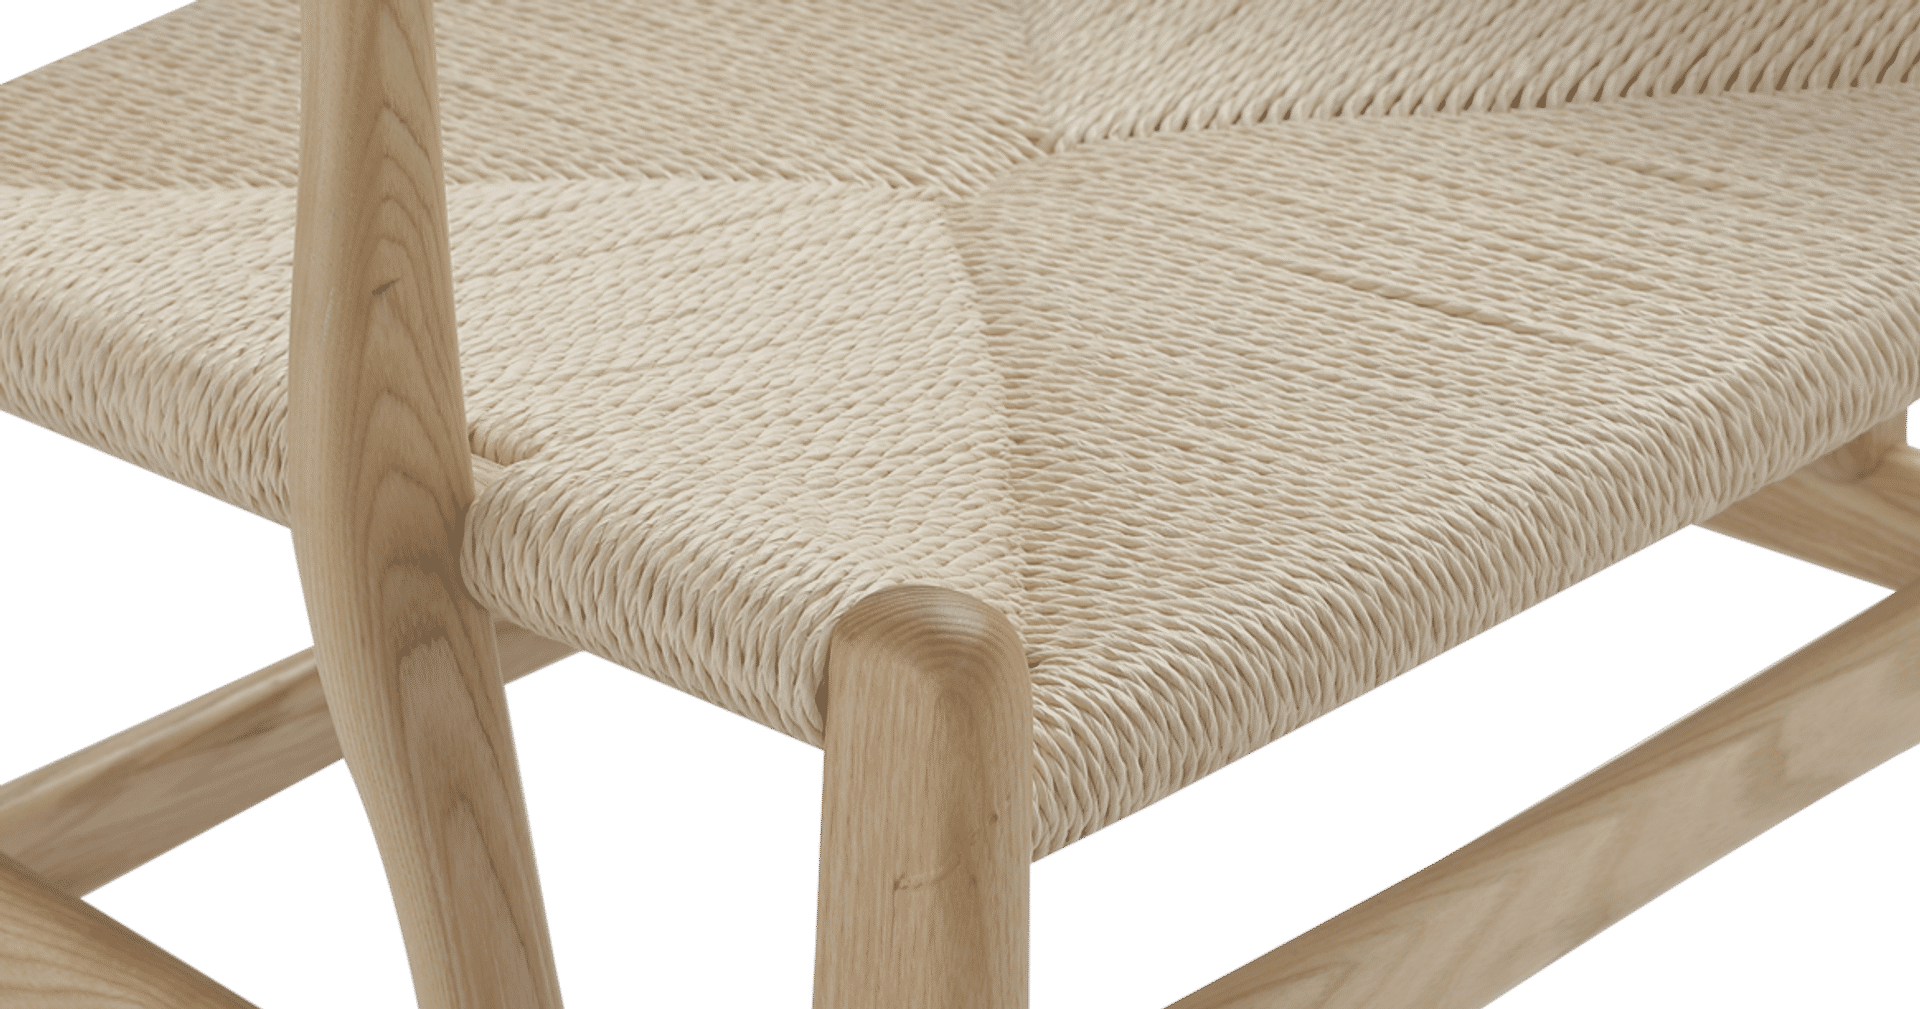 CH26 - Dining Chair - Natural Cord